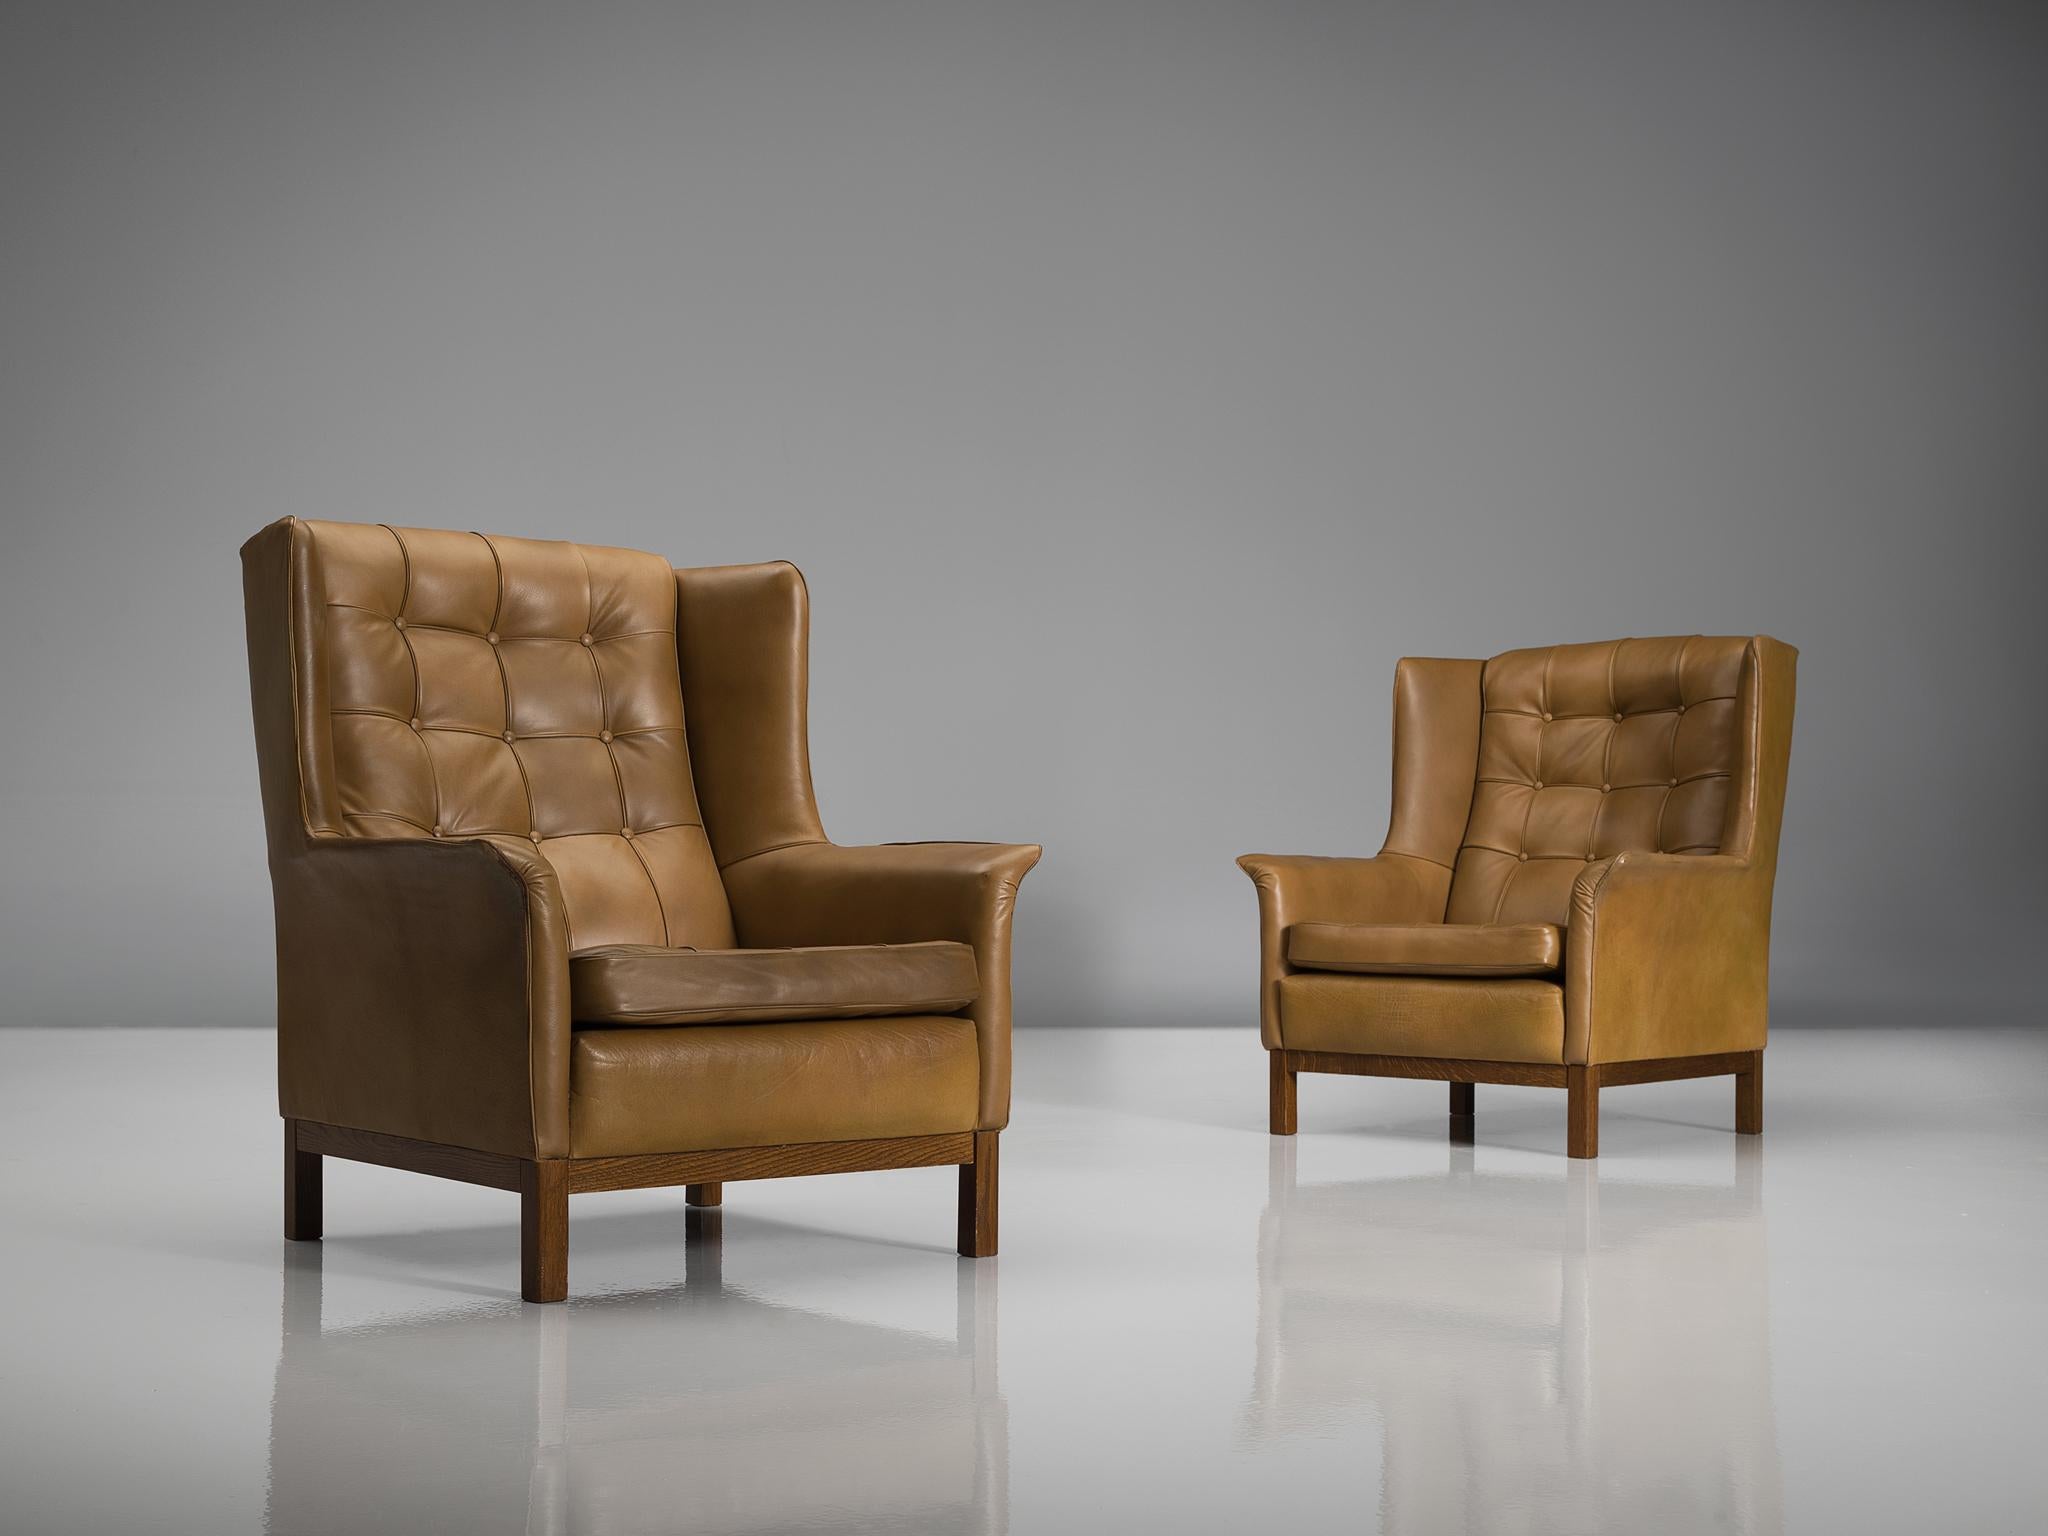 Arne Norell, pair of highback chairs, in leather and wood, Sweden, 1960s.

Wonderful pair of comfortable buffalo leather easy chairs by Swedish designer Arne Norell. These lounge chairs come with a very high standard of comfort, something that